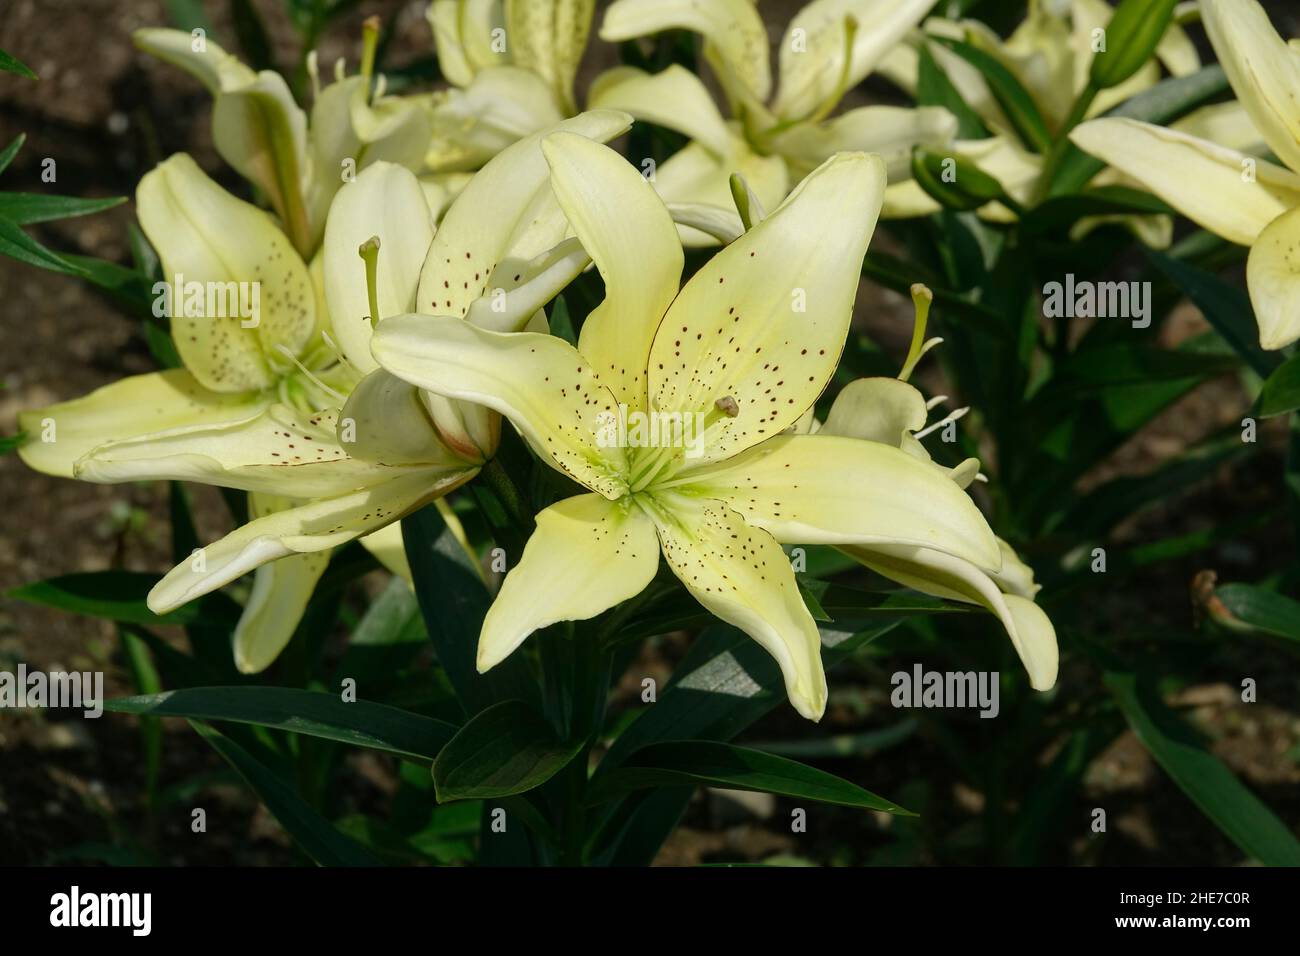 A Cluster Bunch of White Hybrid Lilies with a Light Green Throat, Asiatic, Creamy-White Petals, Brown Spots, Brown Dots, also called King Pete Lily Stock Photo